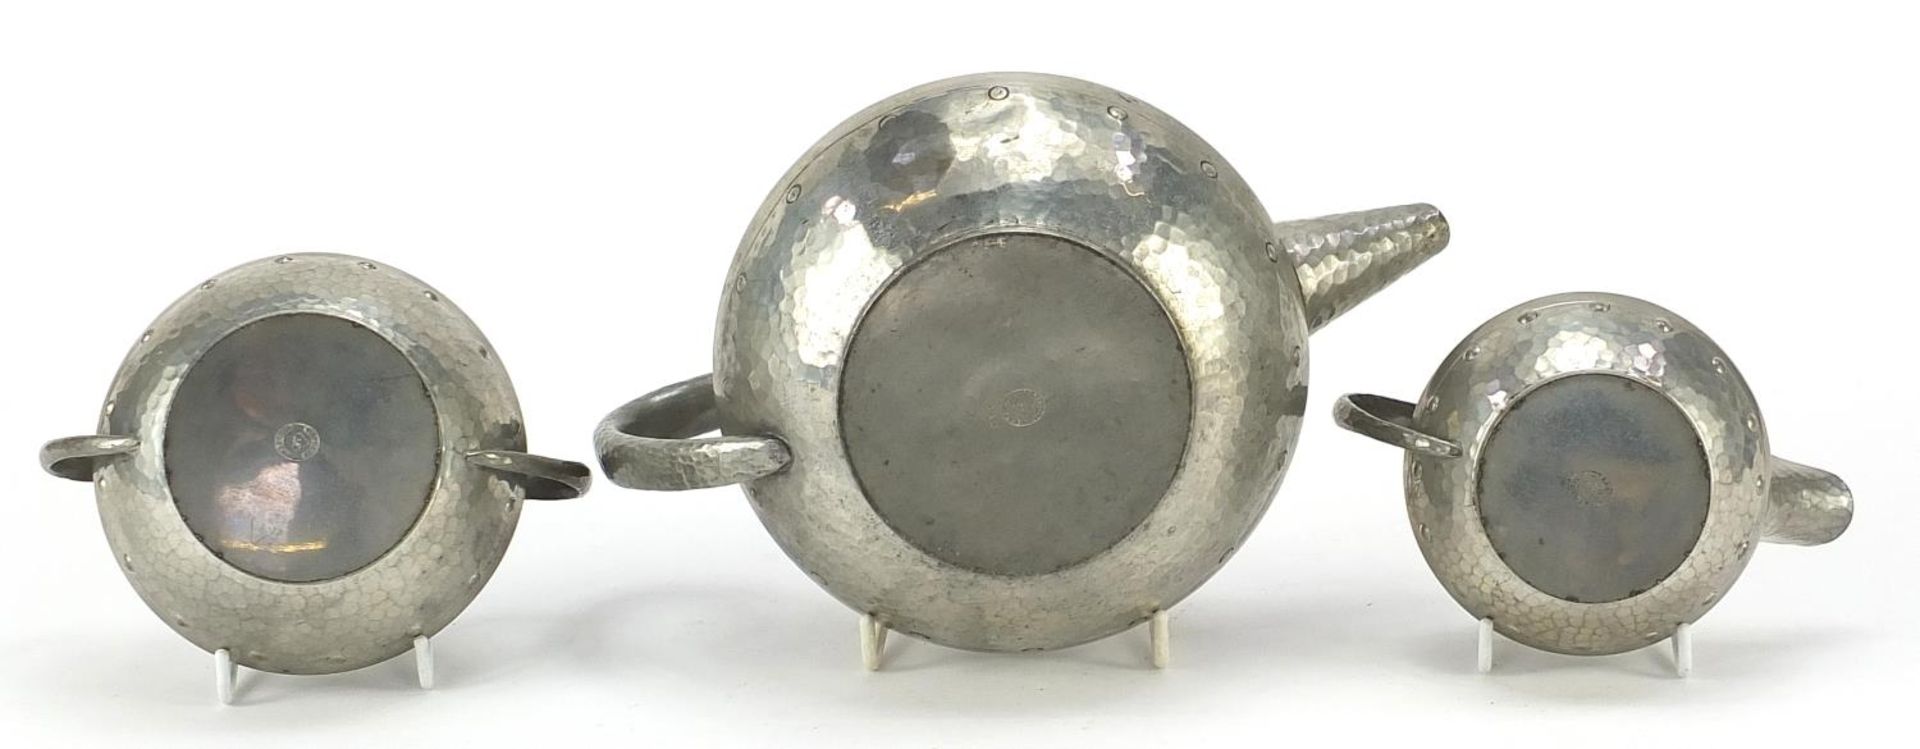 Arts & Crafts baronial pewter tea set, the largest 23.5cm in length - Image 3 of 4